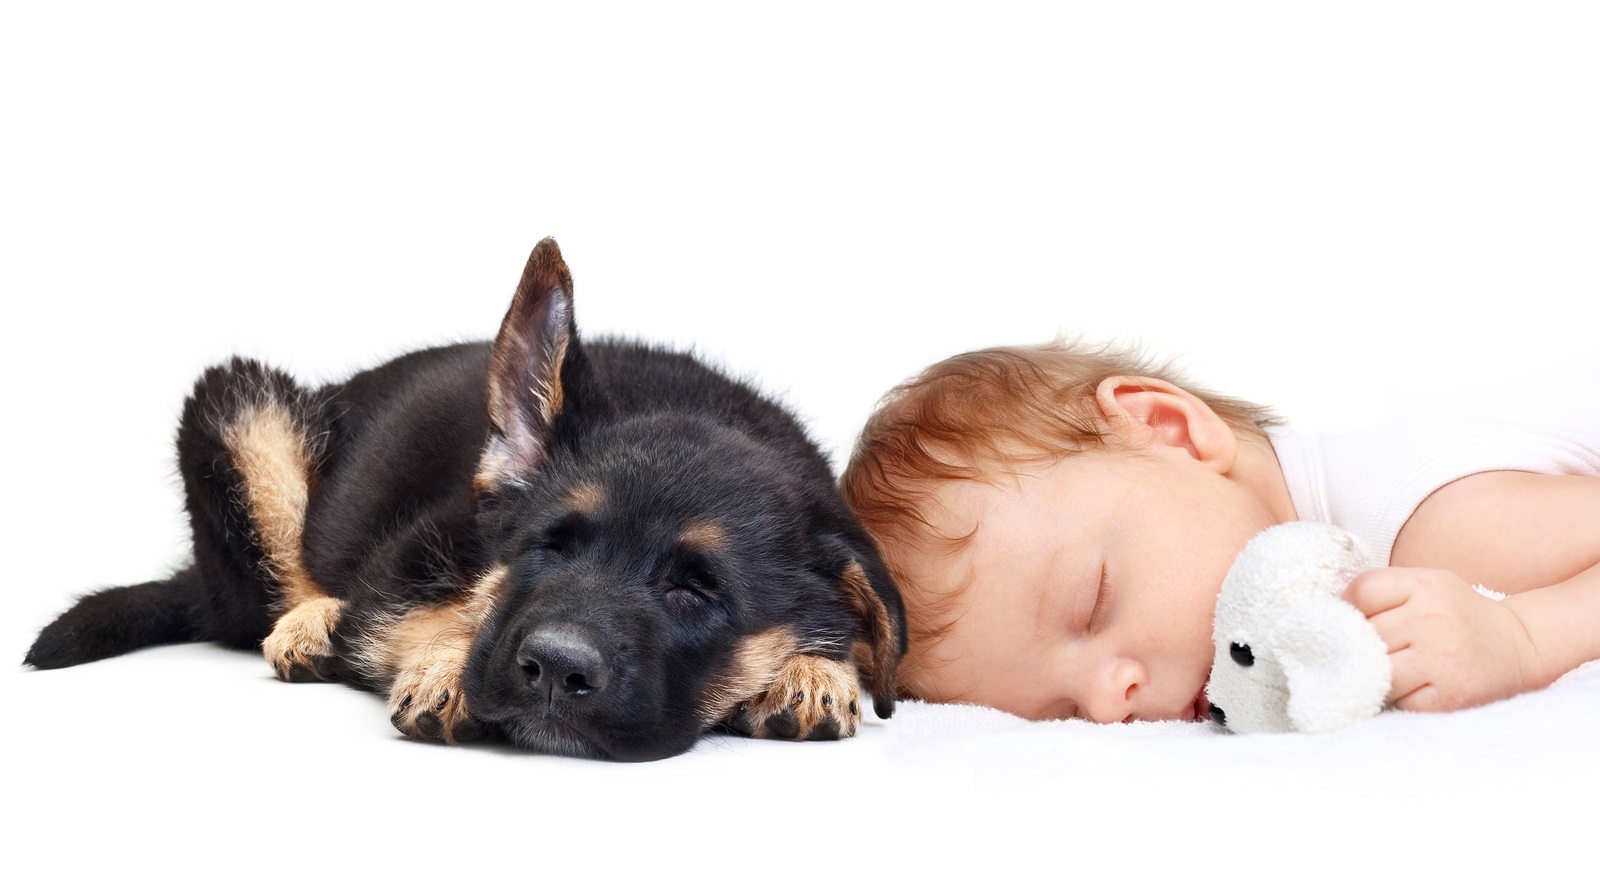 Sleeping Baby Boy with toy dog and puppy.